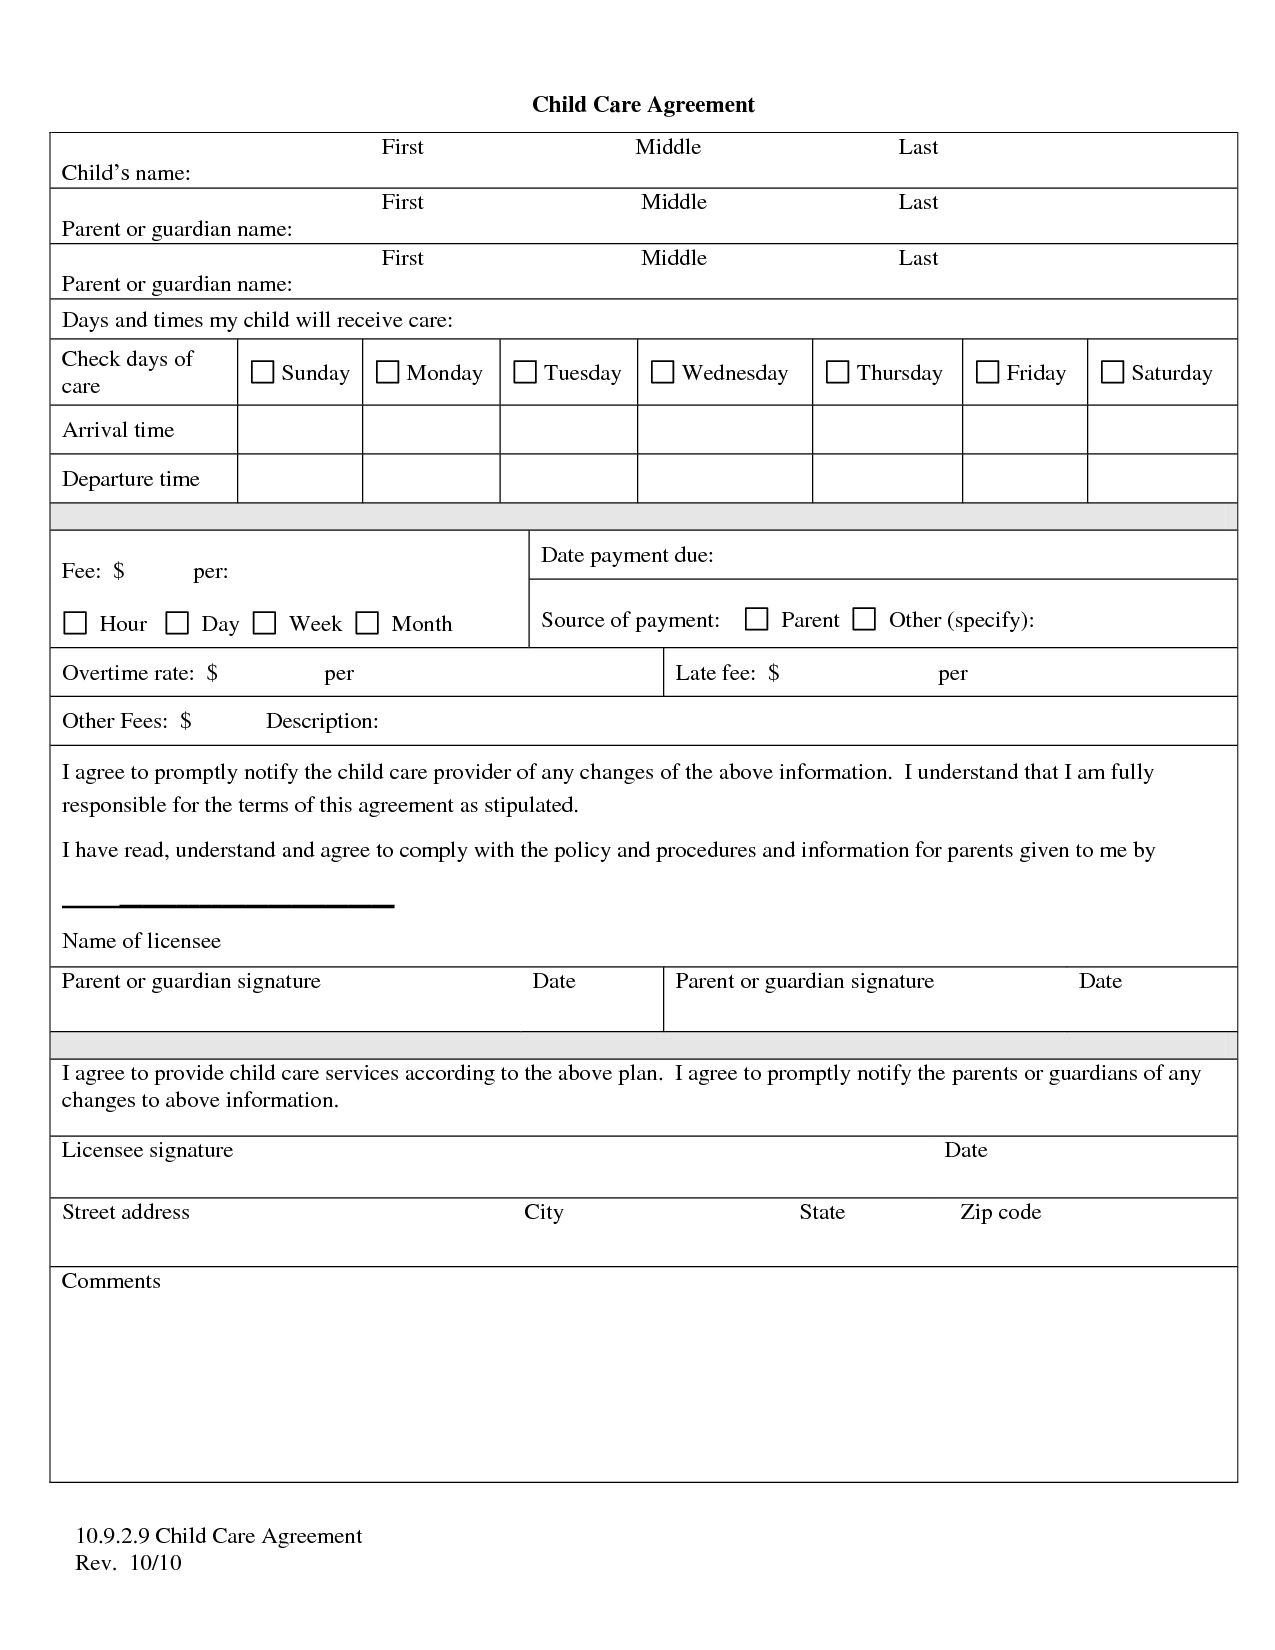 Home Daycare Tax Worksheet